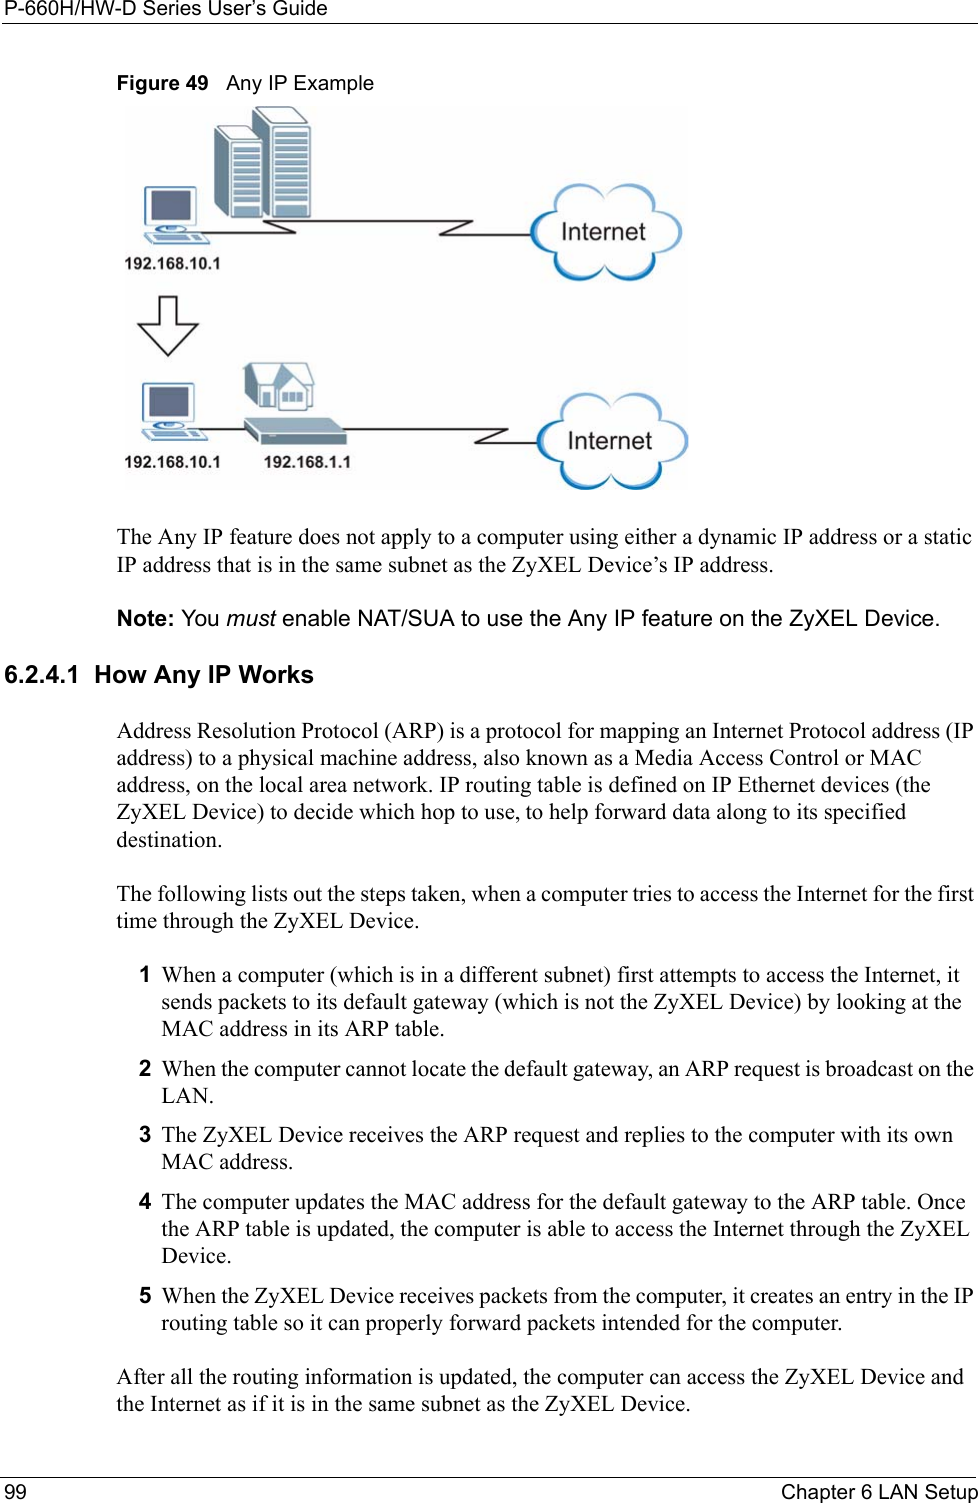 P-660H/HW-D Series User’s Guide99 Chapter 6 LAN SetupFigure 49   Any IP ExampleThe Any IP feature does not apply to a computer using either a dynamic IP address or a static IP address that is in the same subnet as the ZyXEL Device’s IP address.Note: You must enable NAT/SUA to use the Any IP feature on the ZyXEL Device. 6.2.4.1  How Any IP WorksAddress Resolution Protocol (ARP) is a protocol for mapping an Internet Protocol address (IP address) to a physical machine address, also known as a Media Access Control or MAC address, on the local area network. IP routing table is defined on IP Ethernet devices (the ZyXEL Device) to decide which hop to use, to help forward data along to its specified destination.The following lists out the steps taken, when a computer tries to access the Internet for the first time through the ZyXEL Device.1When a computer (which is in a different subnet) first attempts to access the Internet, it sends packets to its default gateway (which is not the ZyXEL Device) by looking at the MAC address in its ARP table. 2When the computer cannot locate the default gateway, an ARP request is broadcast on the LAN. 3The ZyXEL Device receives the ARP request and replies to the computer with its own MAC address. 4The computer updates the MAC address for the default gateway to the ARP table. Once the ARP table is updated, the computer is able to access the Internet through the ZyXEL Device. 5When the ZyXEL Device receives packets from the computer, it creates an entry in the IP routing table so it can properly forward packets intended for the computer. After all the routing information is updated, the computer can access the ZyXEL Device and the Internet as if it is in the same subnet as the ZyXEL Device. 